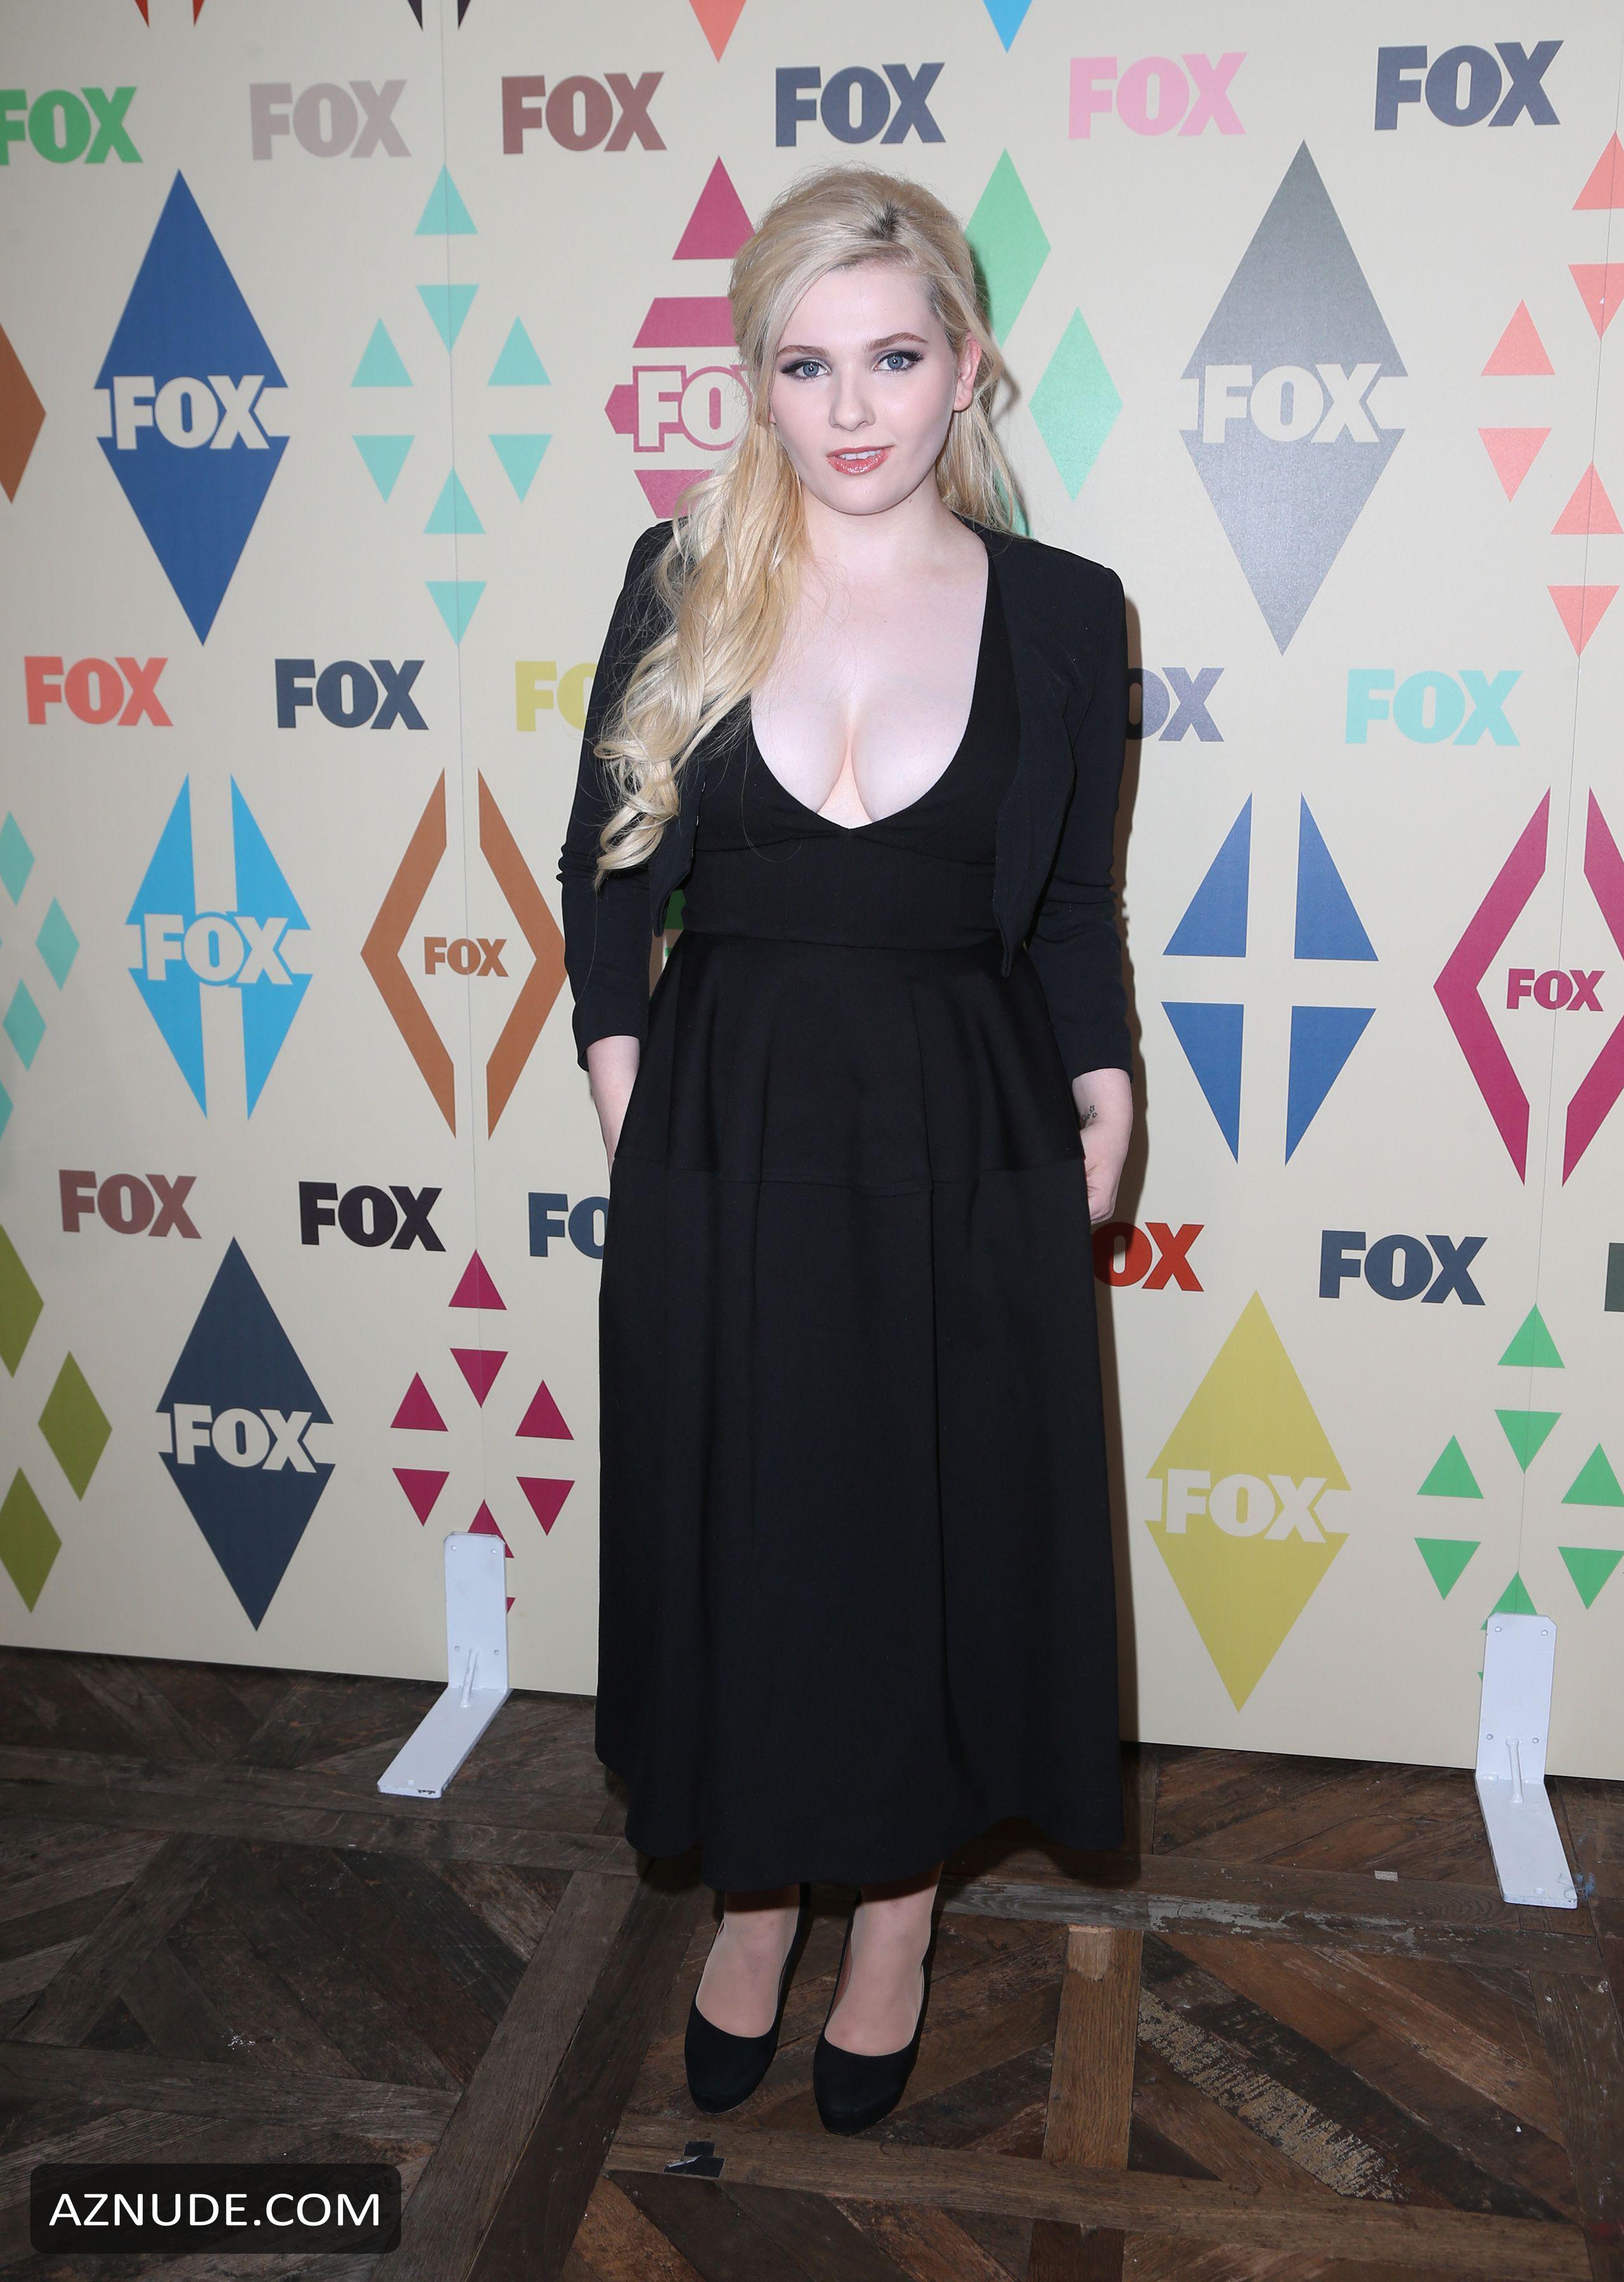 Abigail Breslin Cleavage At The Fox Fx Summer 2015 Tca Party In West Hollywood Aznude